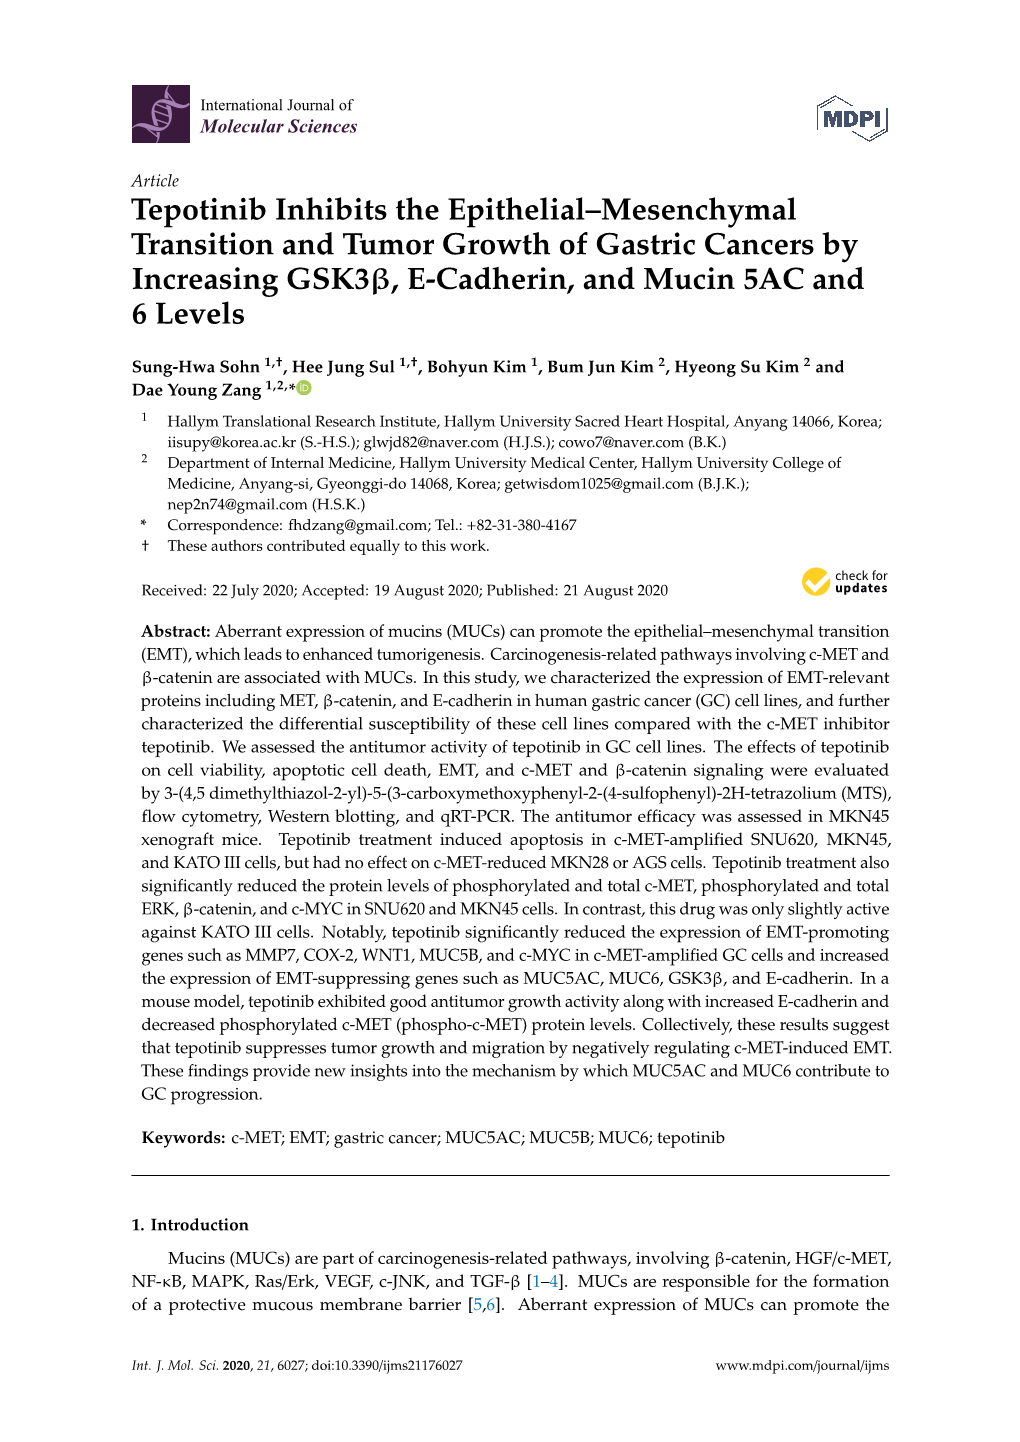 Tepotinib Inhibits the Epithelial–Mesenchymal Transition and Tumor Growth of Gastric Cancers by Increasing Gsk3β, E-Cadherin, and Mucin 5AC and 6 Levels